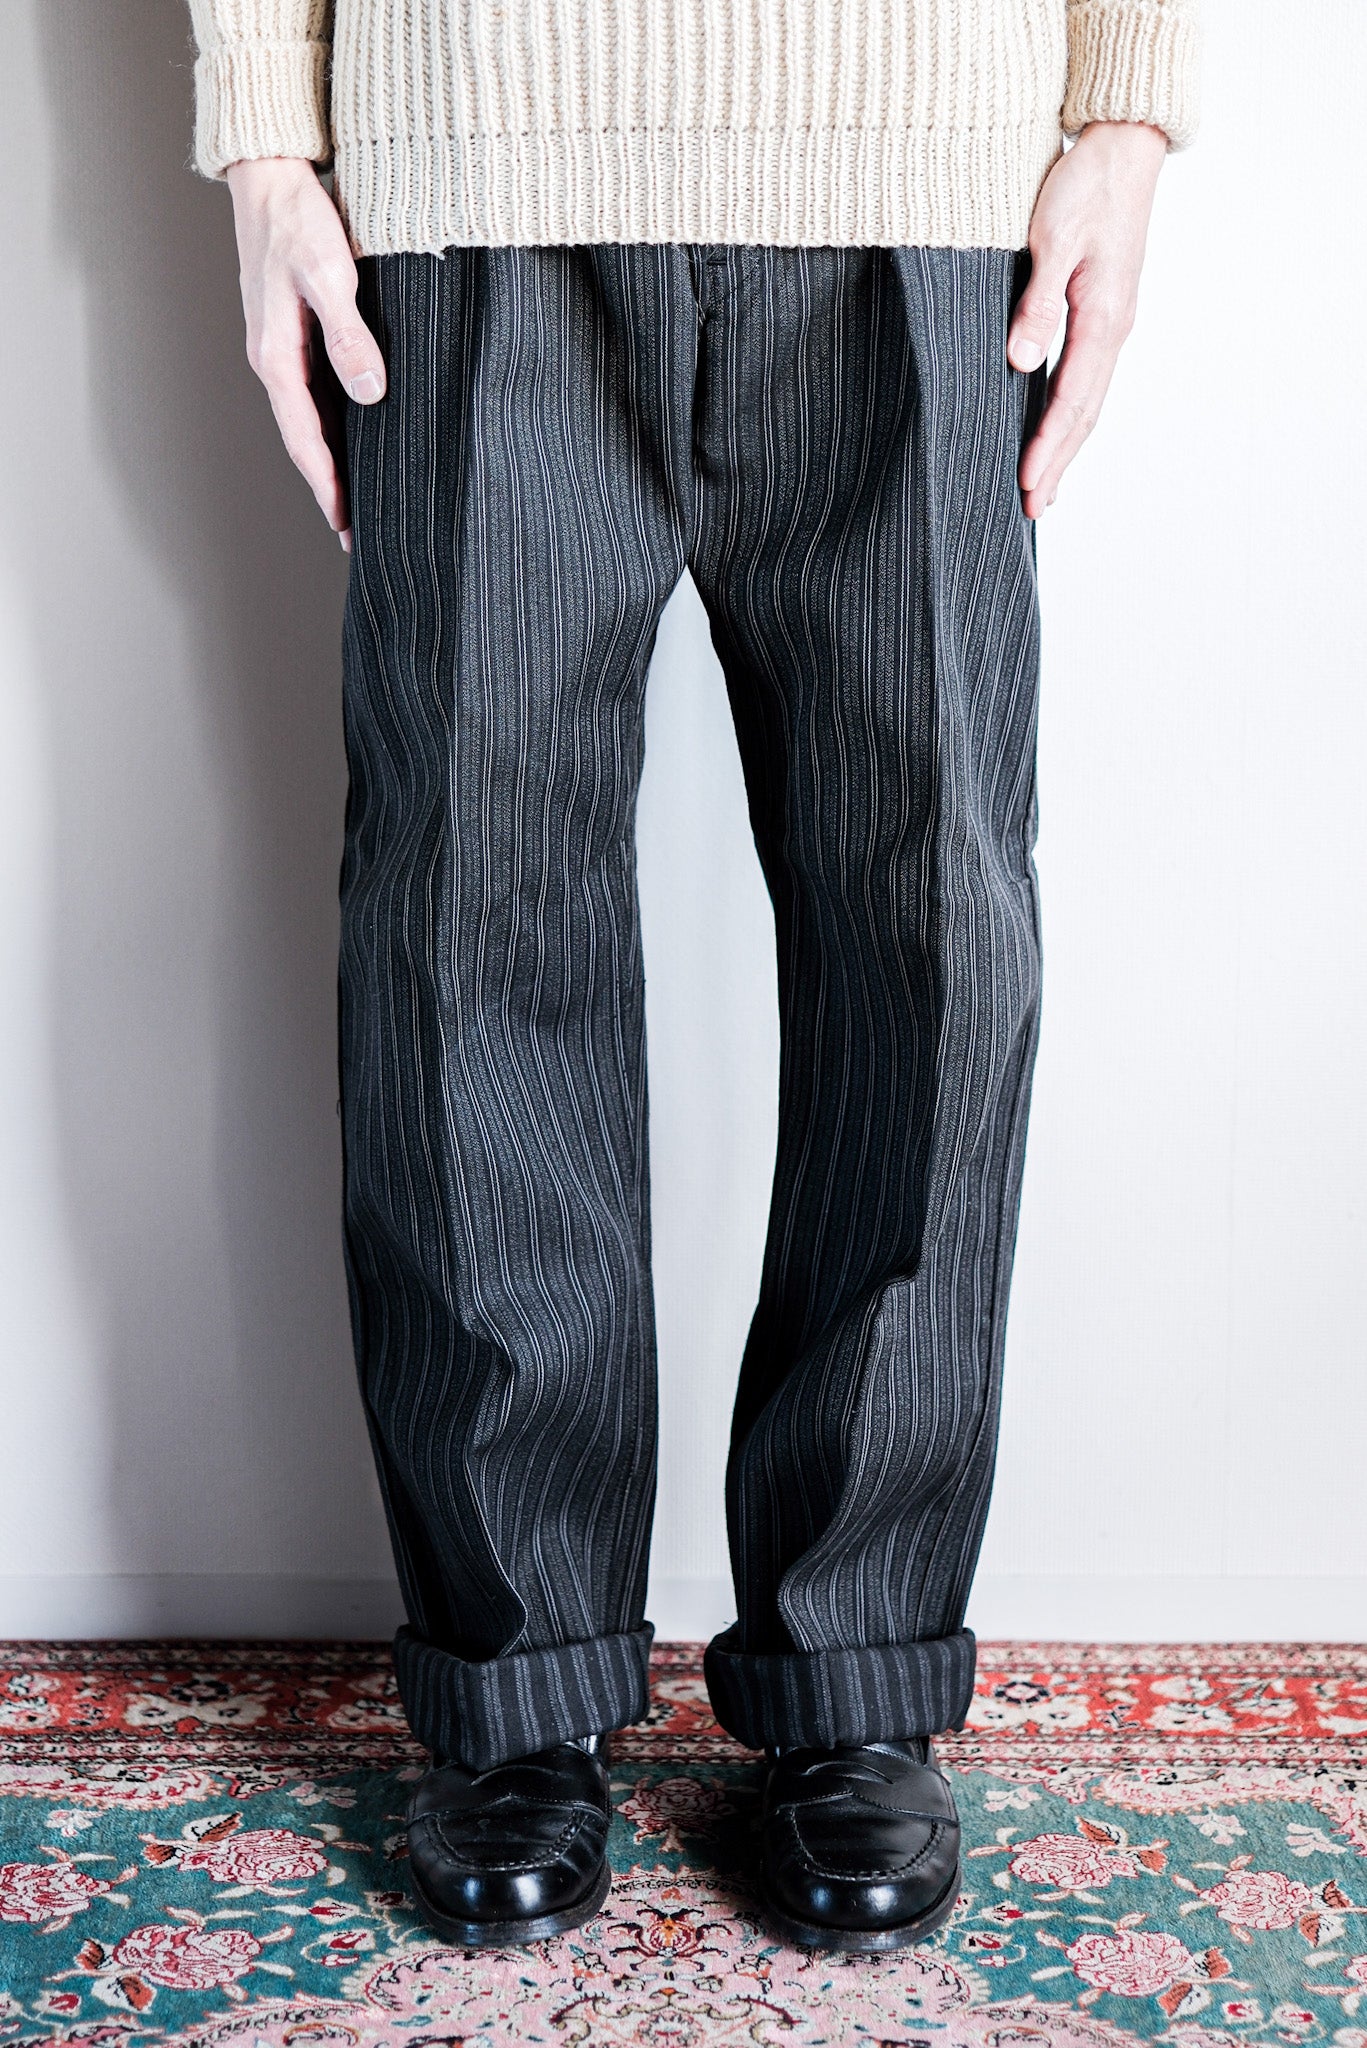 【~50's】French Vintage Cotton Striped Work Pants "CREPIER" "Dead Stock"